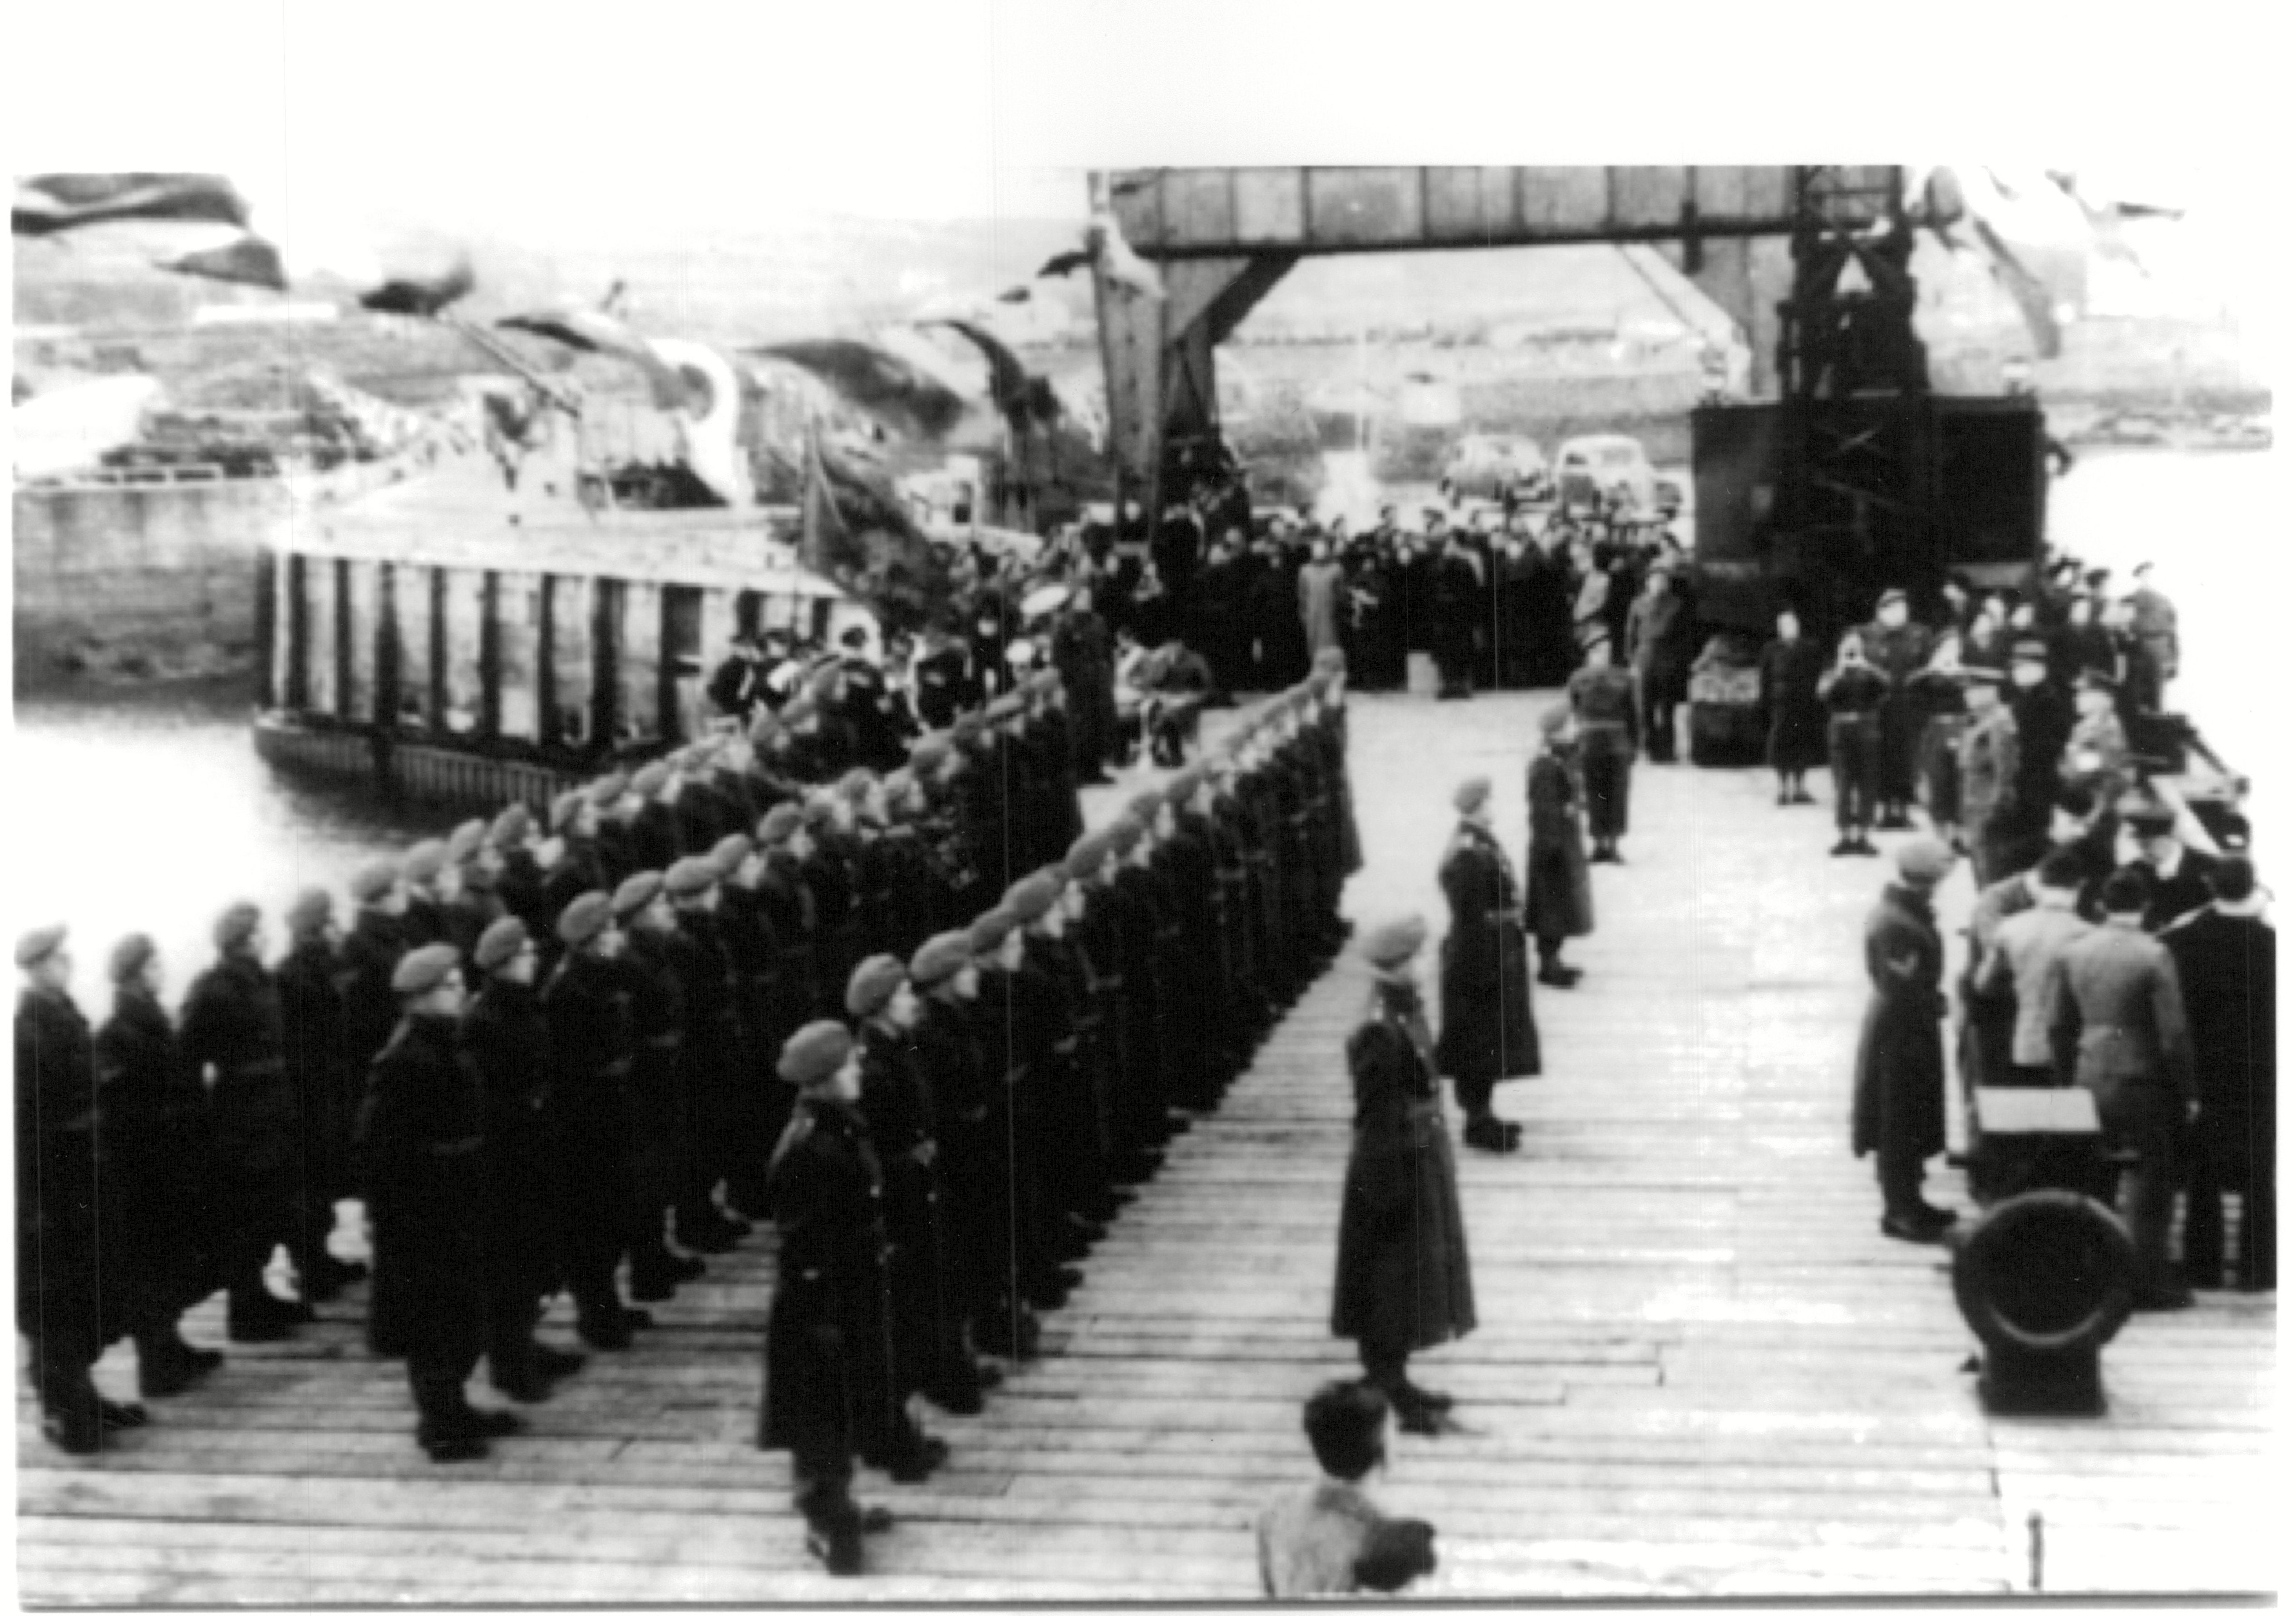 The British garrison welcomes the returning islanders who evacuated prior to the Nazi occupation in 1940